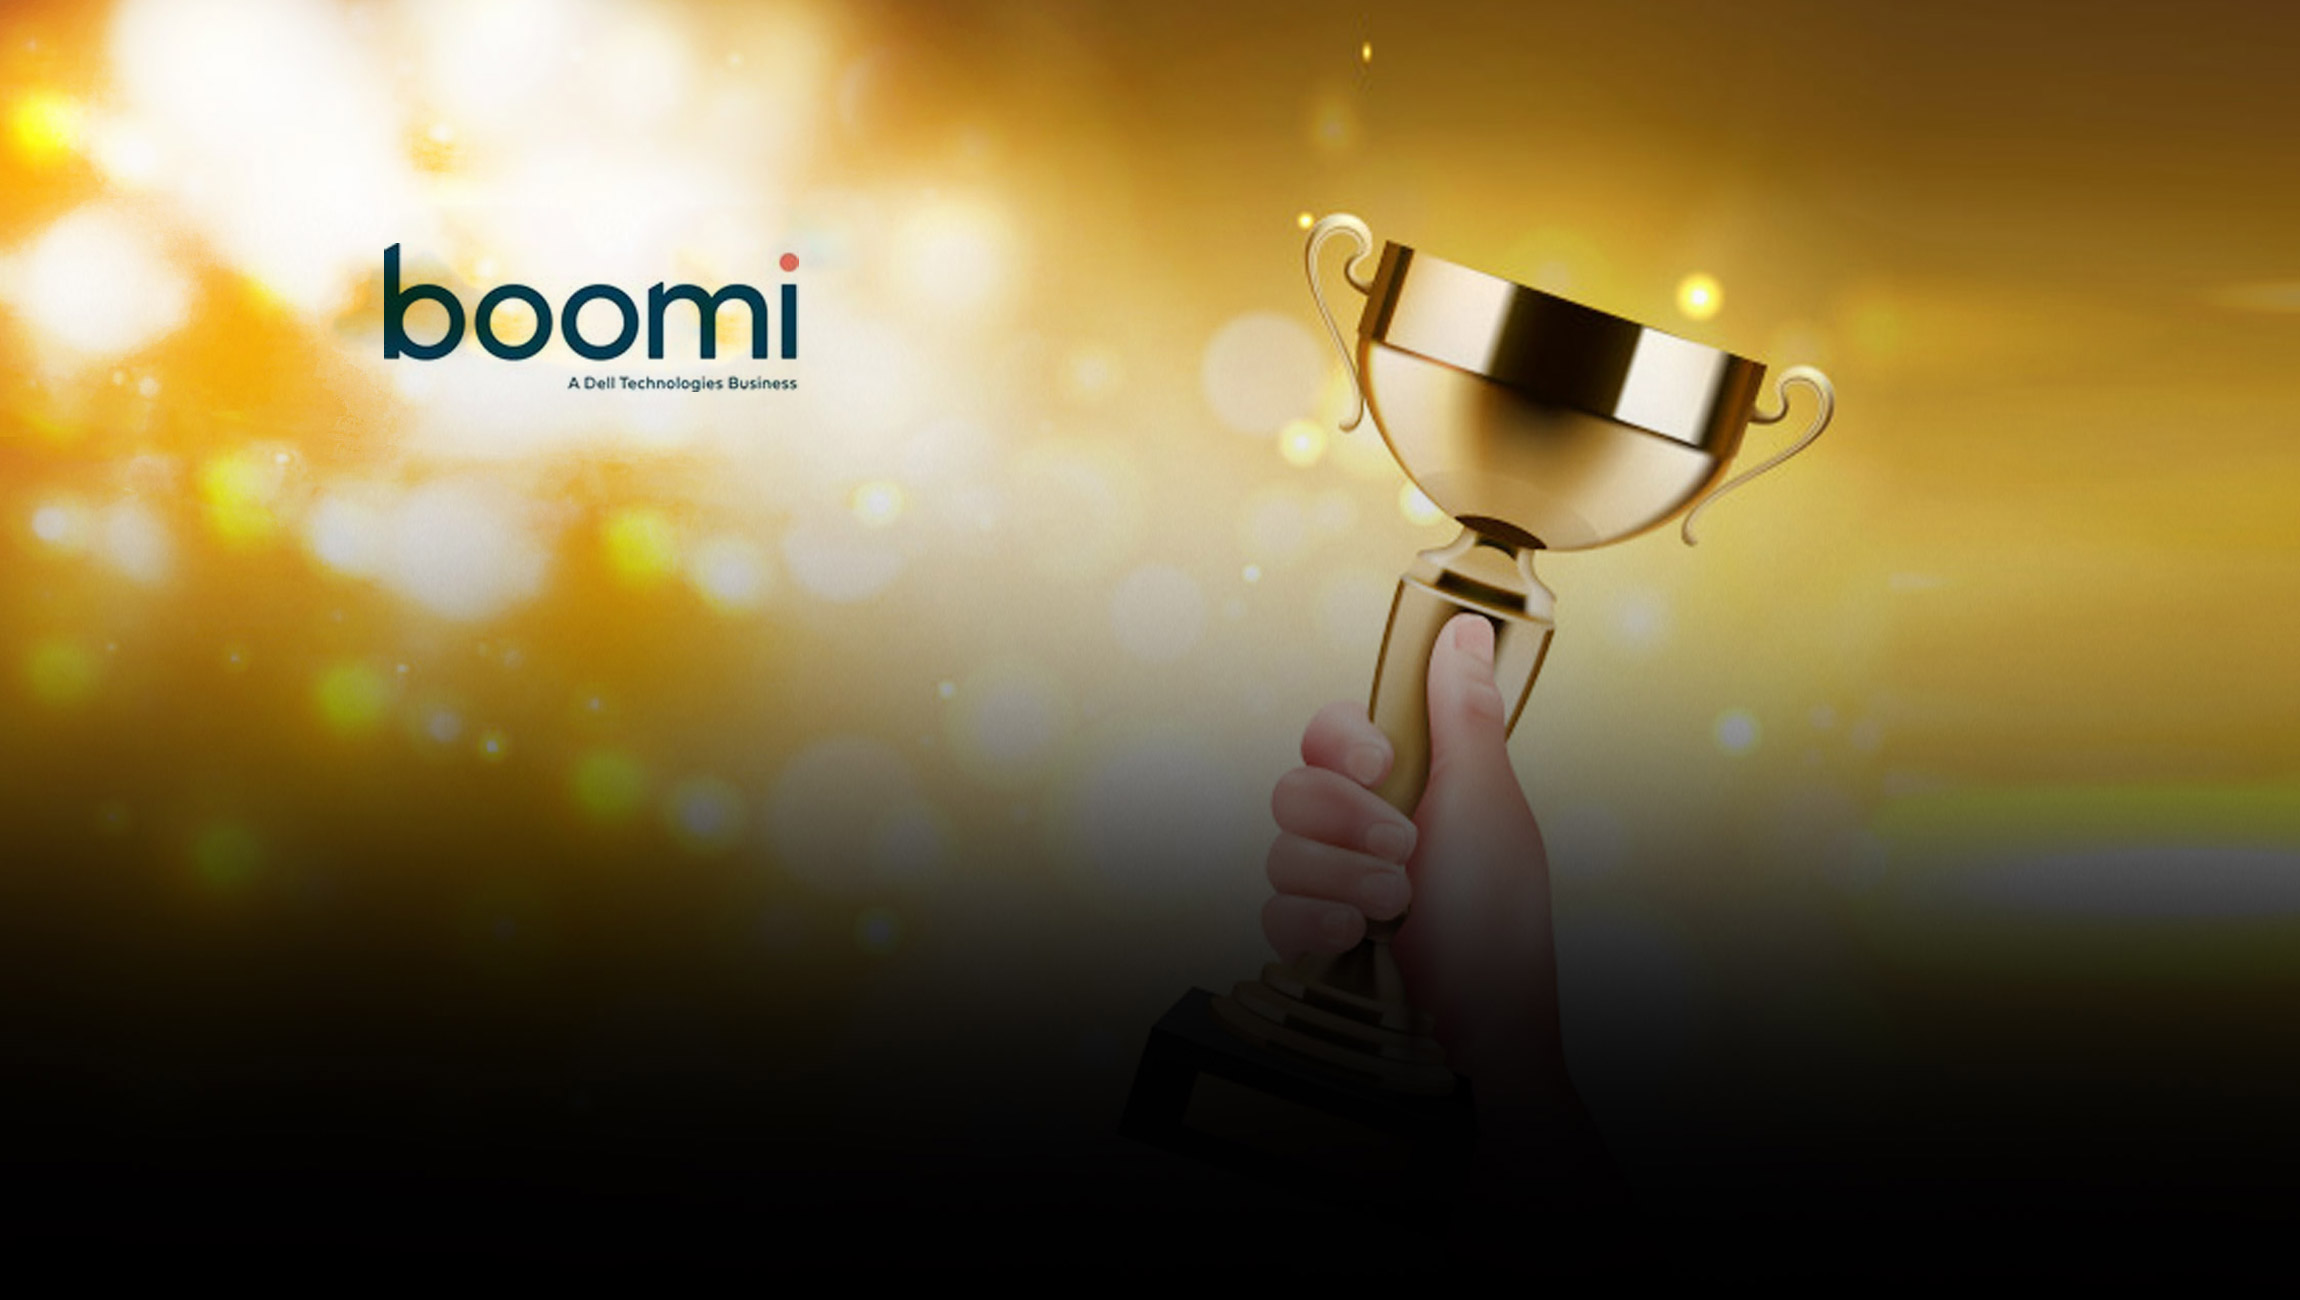 Boomi Announces Partner Award Winners Headlined by Accenture and Deloitte at 2022 EMEA Partner Summit